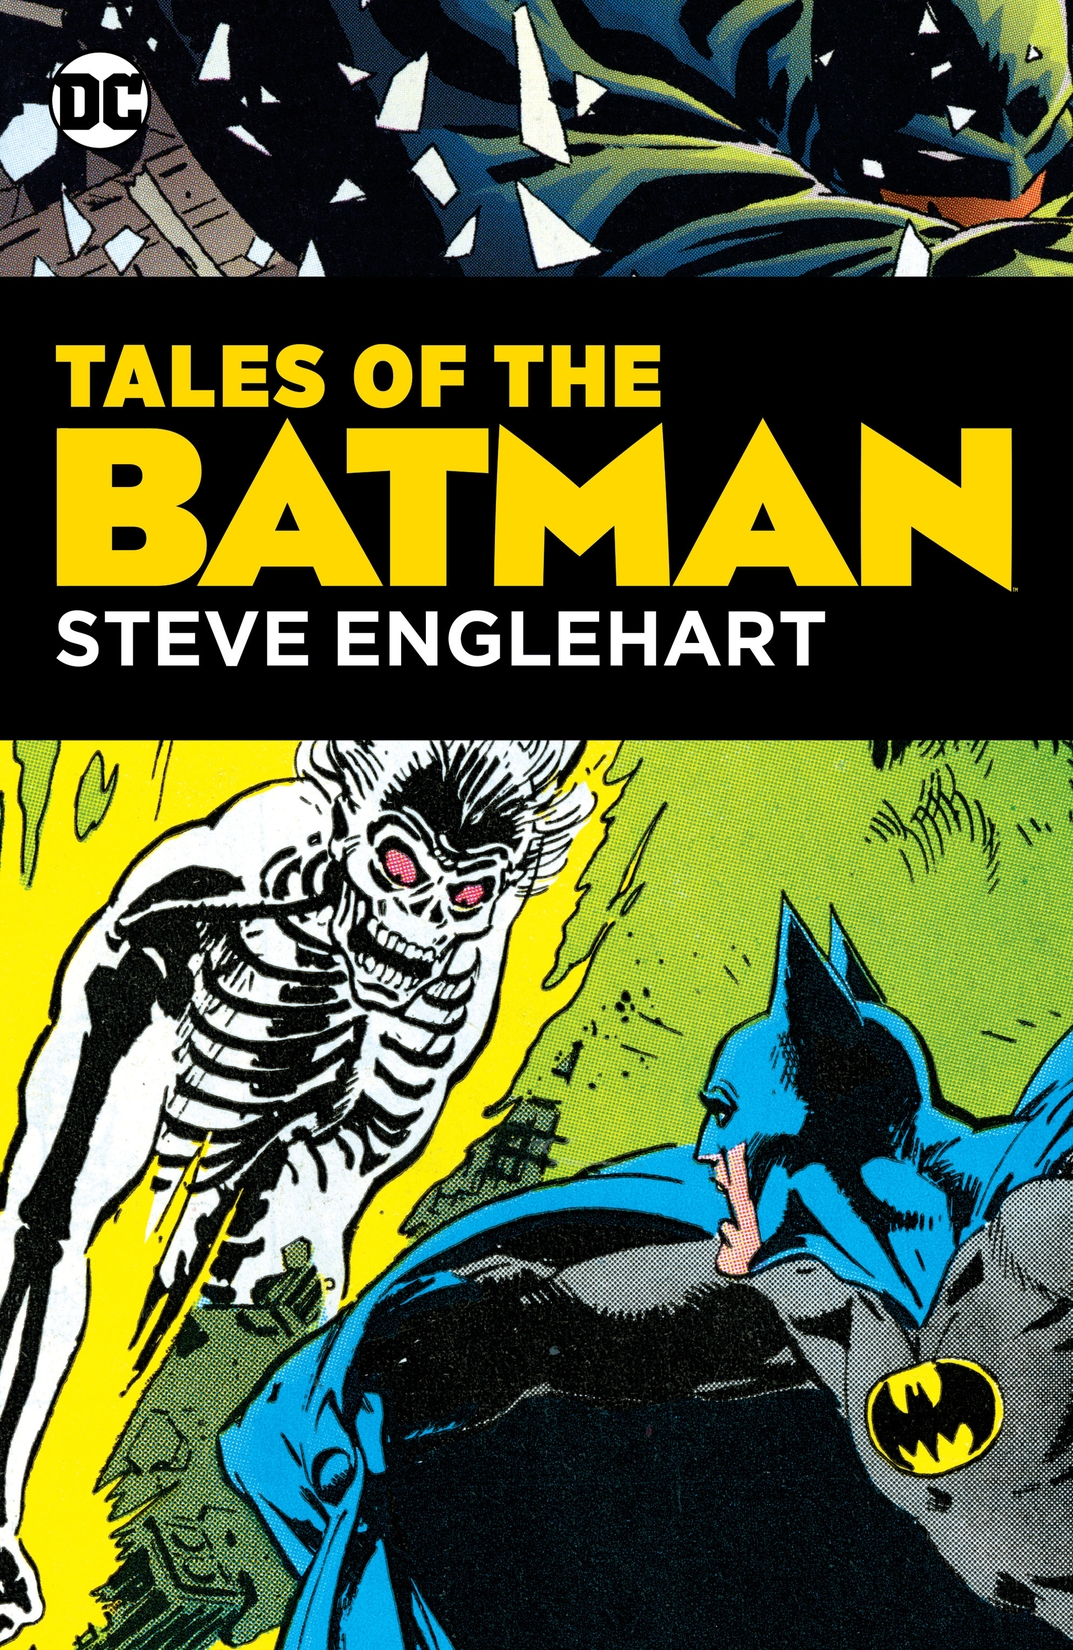 Tales of the Batman: Steve Englehart preview images